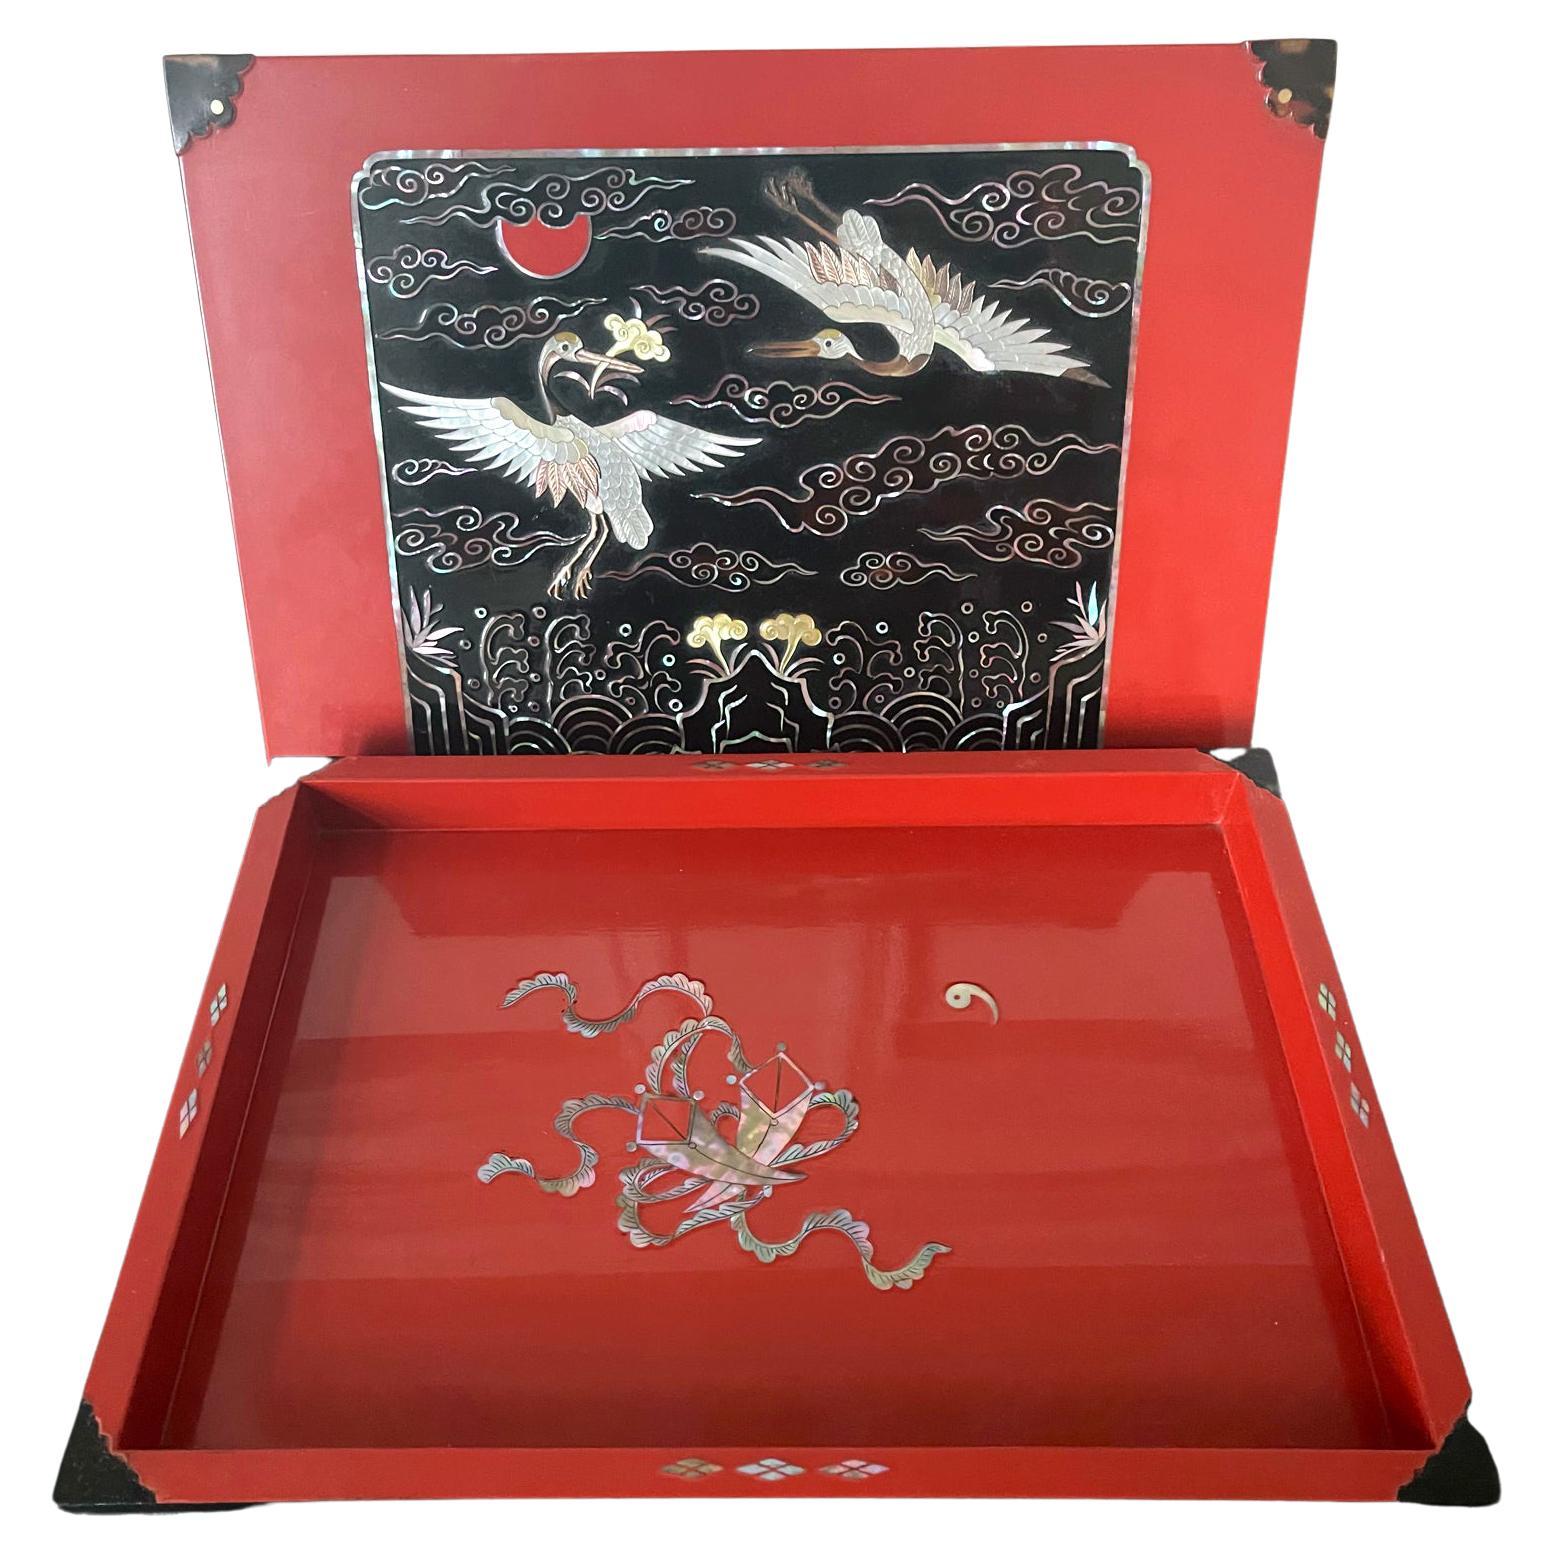 A lovely vintage Korean lacquer box in bright red and decorated with mother-of-pearl inlays circa 1970-80s. The square form box features an auspiciously rendered panel on the top surface of the lid. Within the black rectangular field, MOP inlays was